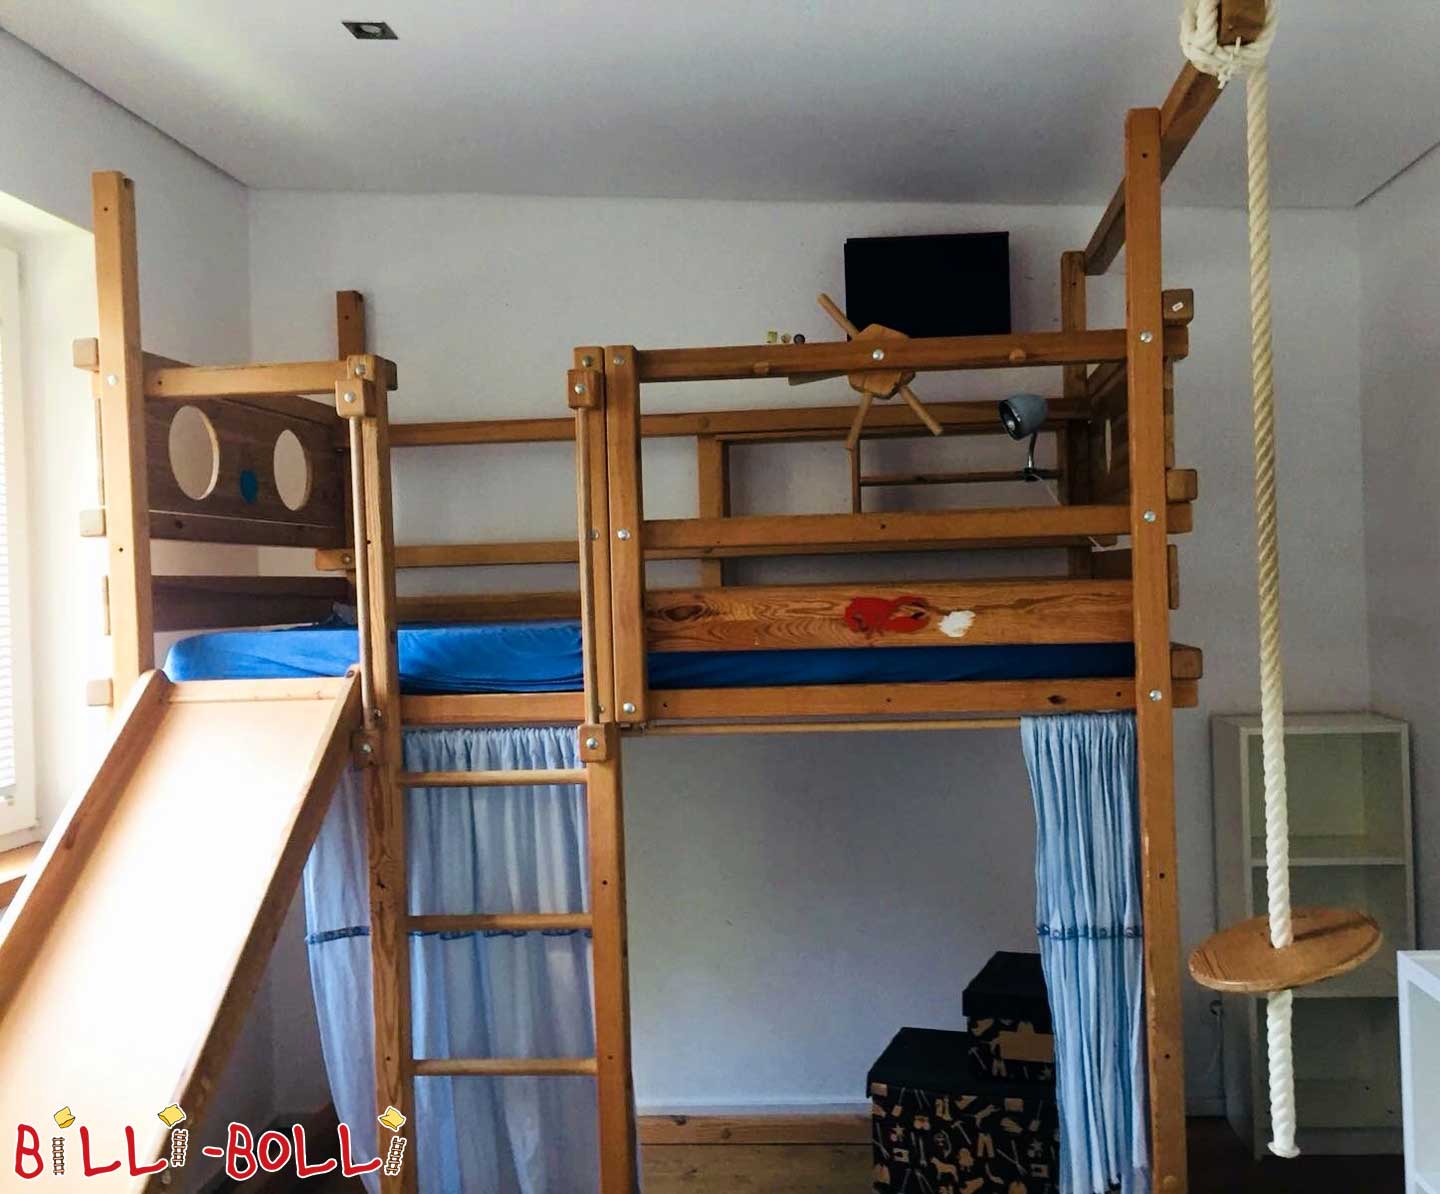 Growing loft bed with slide (Category: second hand loft bed)